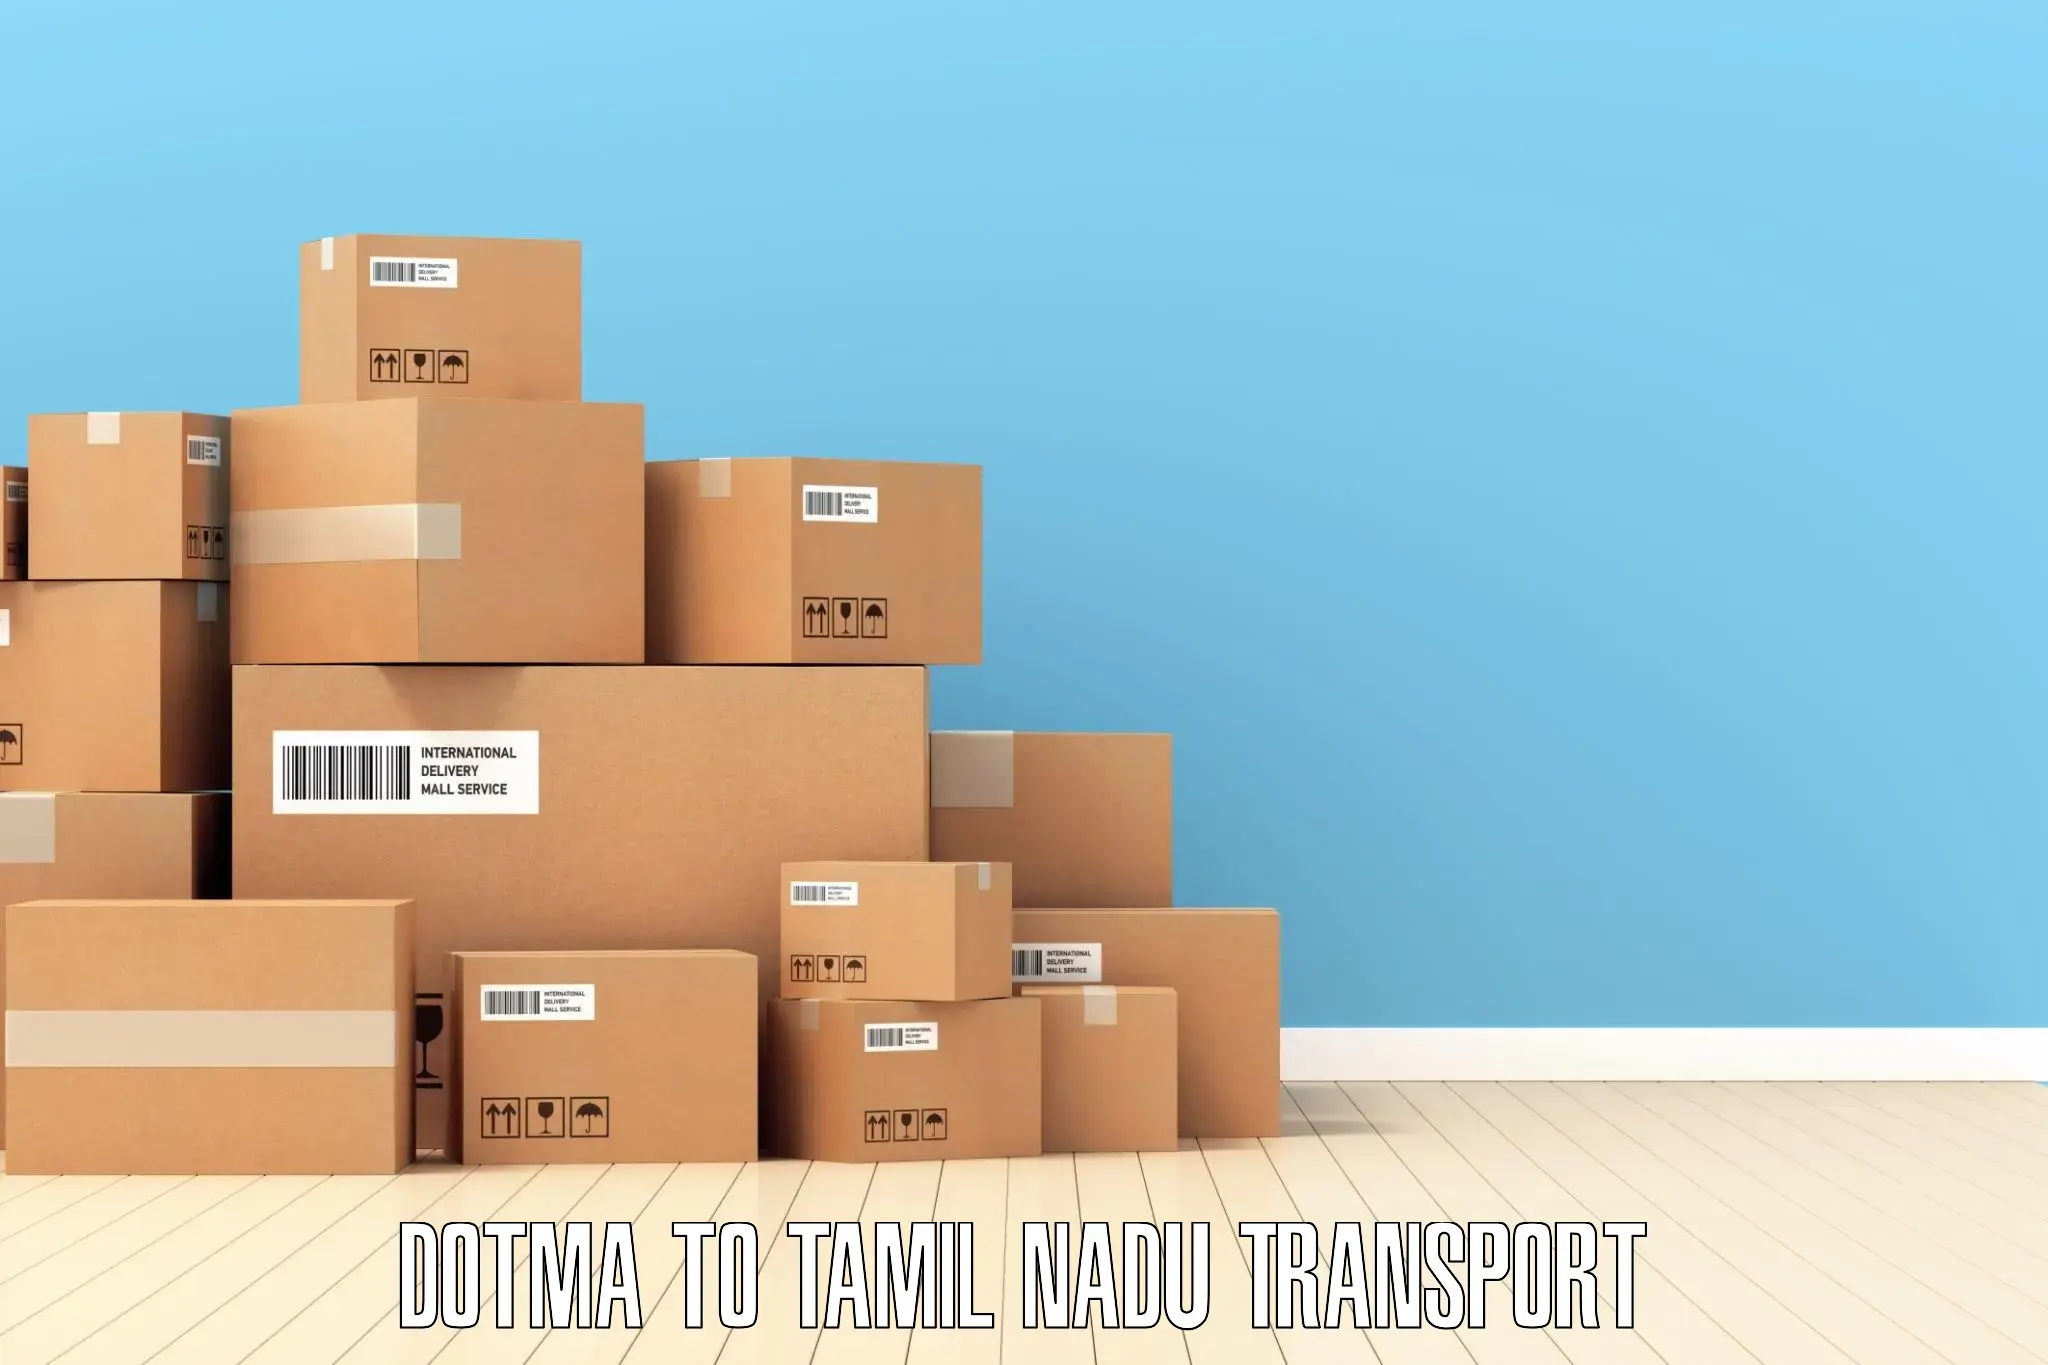 Container transportation services Dotma to Thuckalay